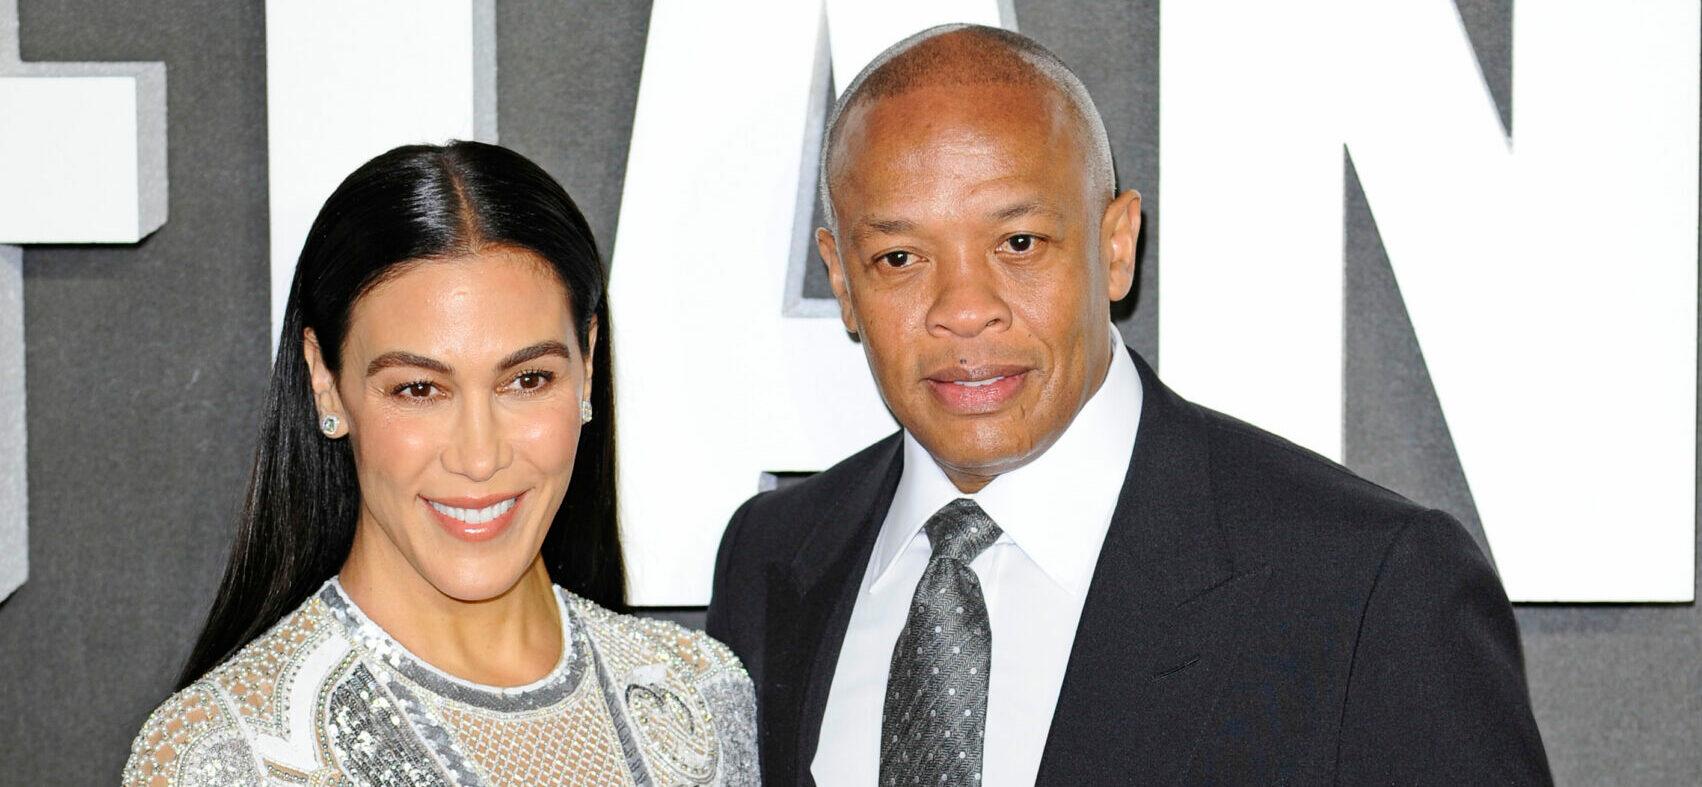 Nicole Young Claims Dr. Dre Owes Her $1 MILLION In Legal Fees!